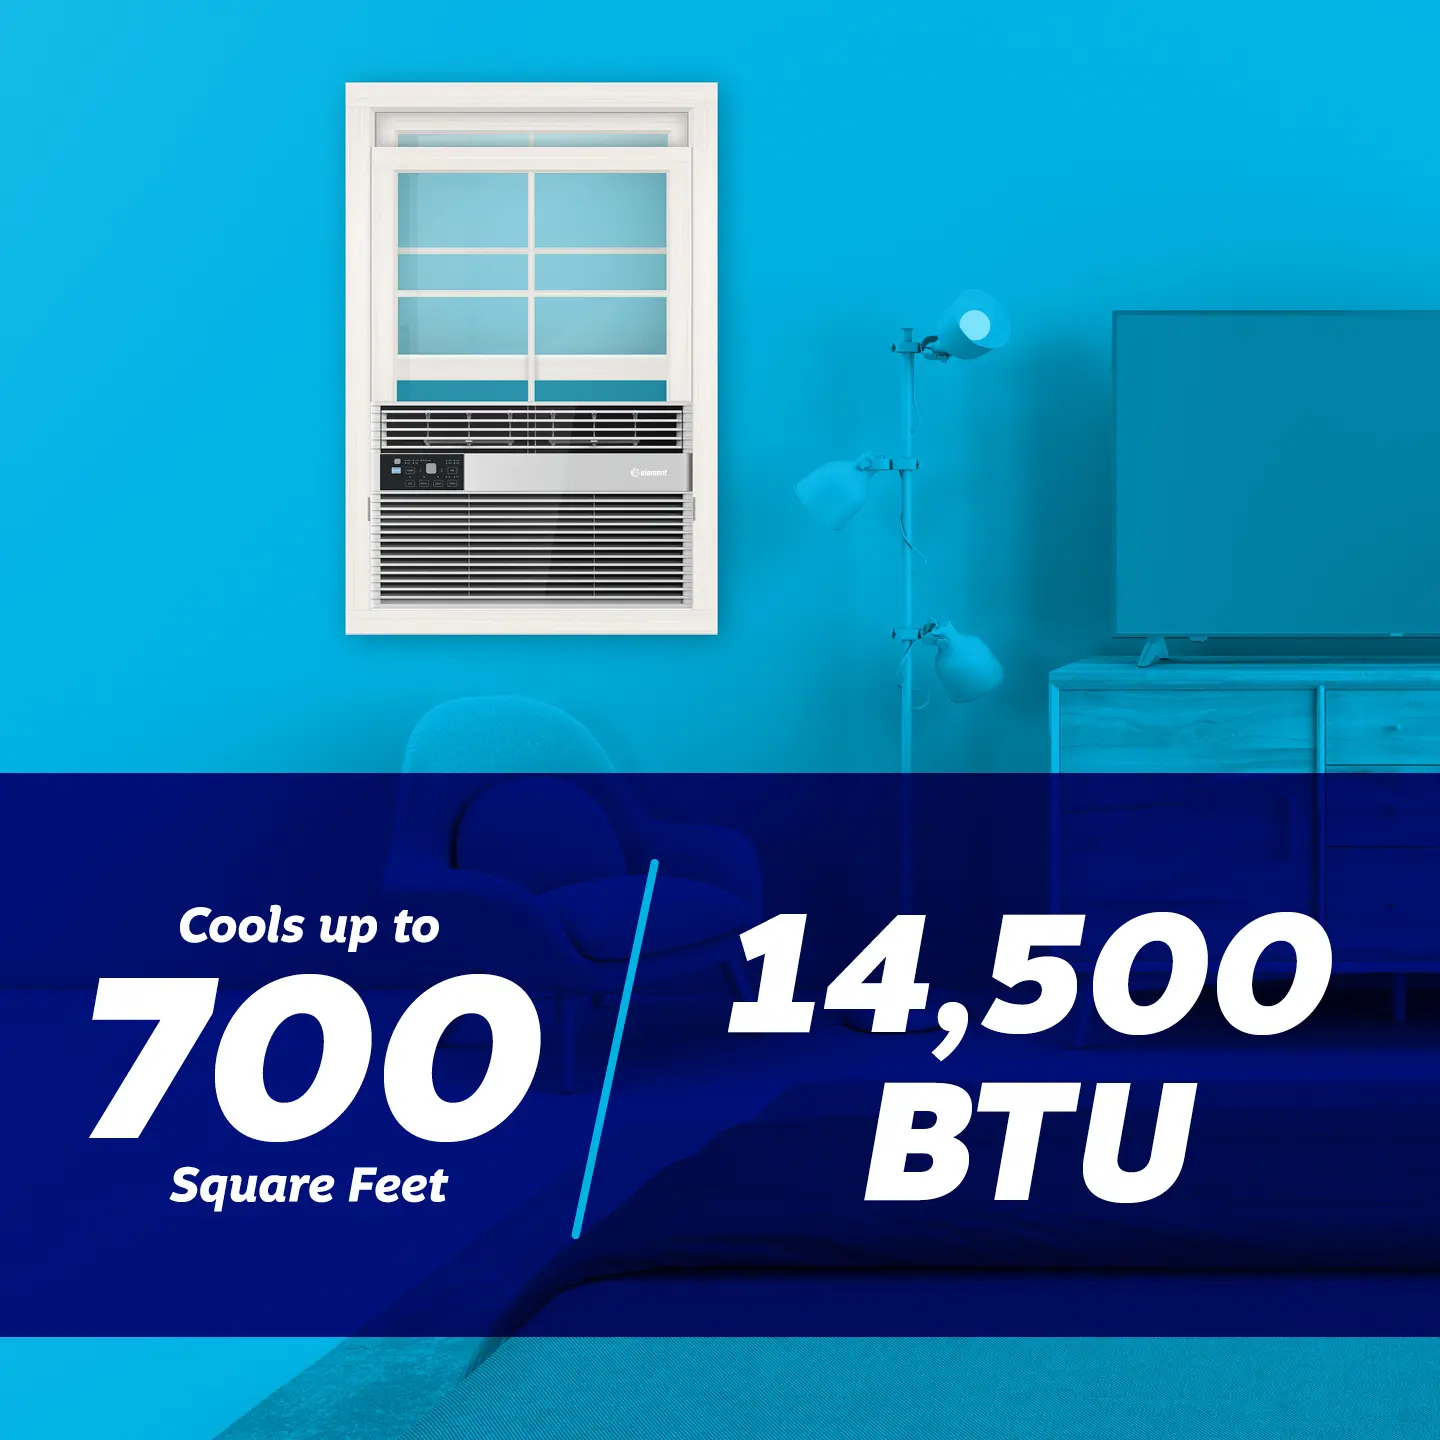 14500 BTU AC - cools up to 700 sq ft